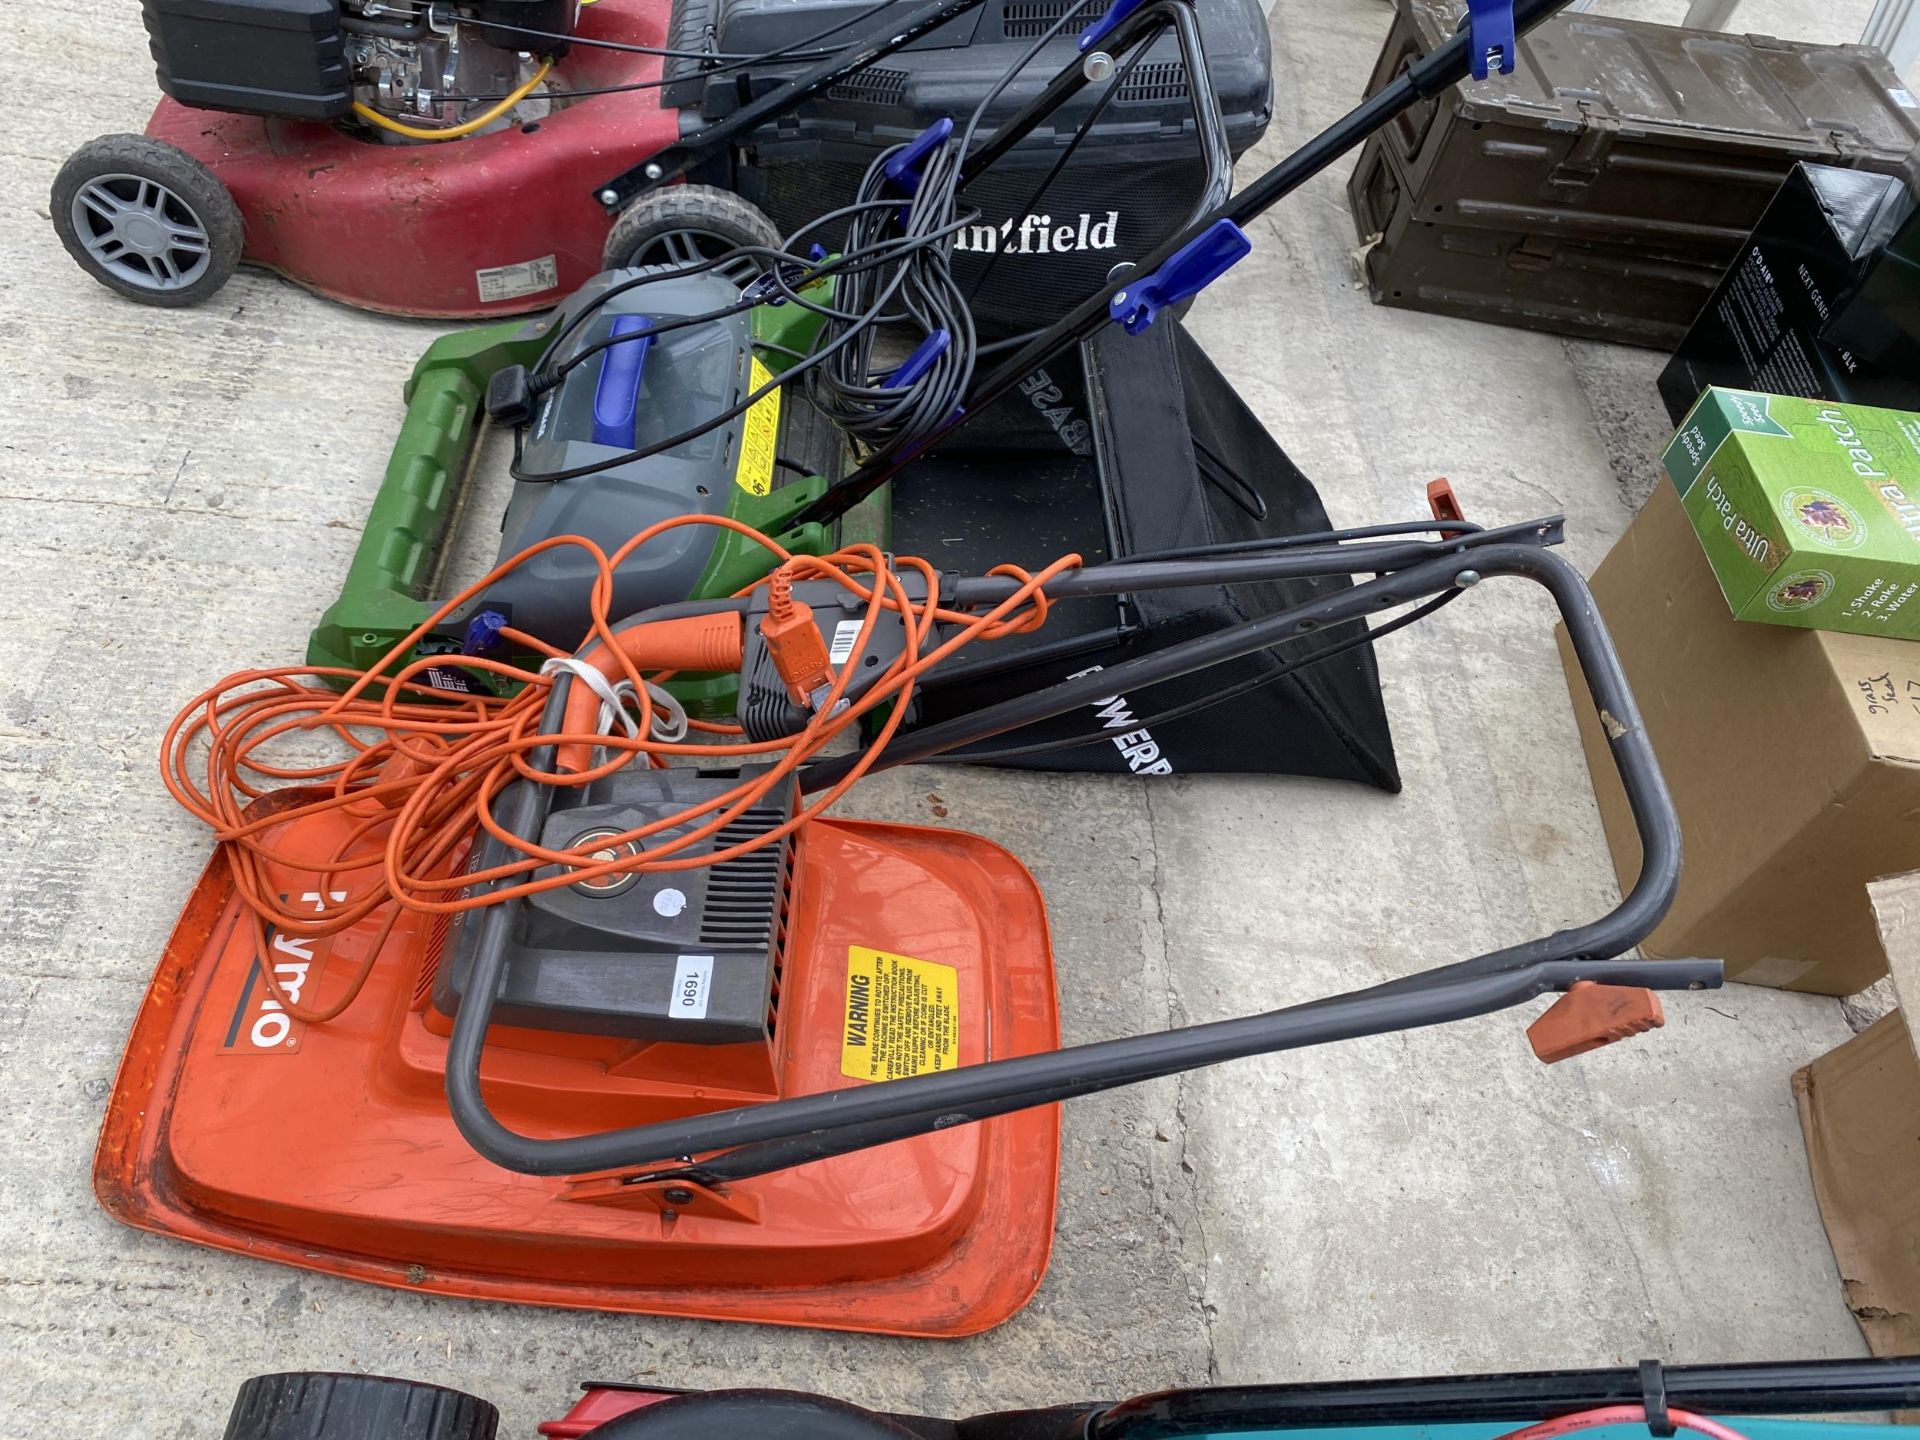 TWO ELECTRIC LAWN MOWERS, A FLYMO AND A POWERBASE - Image 2 of 3